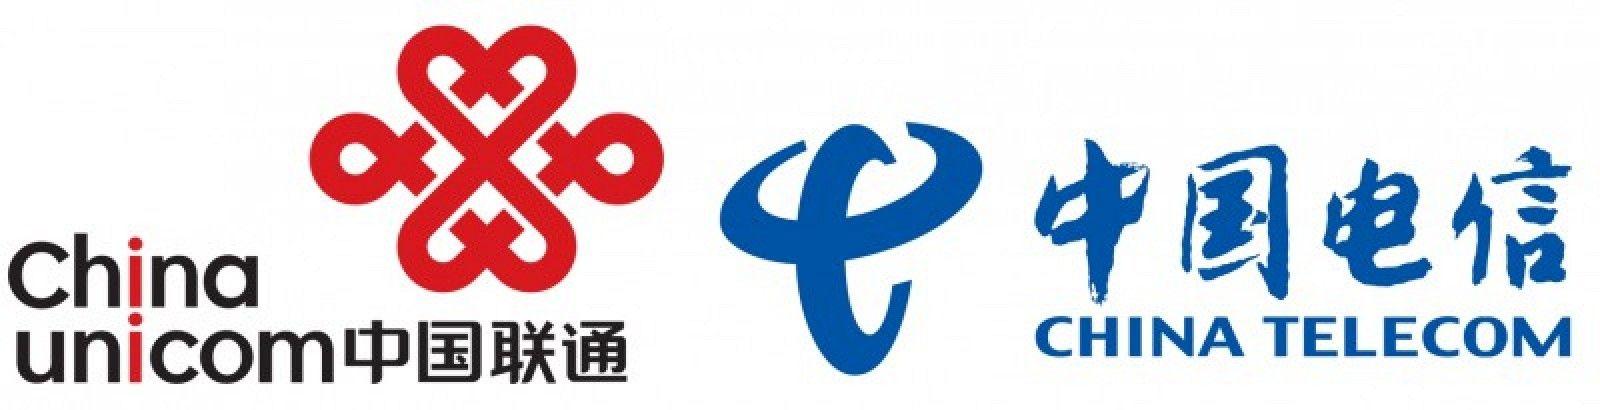 Chinese Telecommunications Company Logo - China Unicom And China Telecom To Start Pre Orders For IPhone 5S